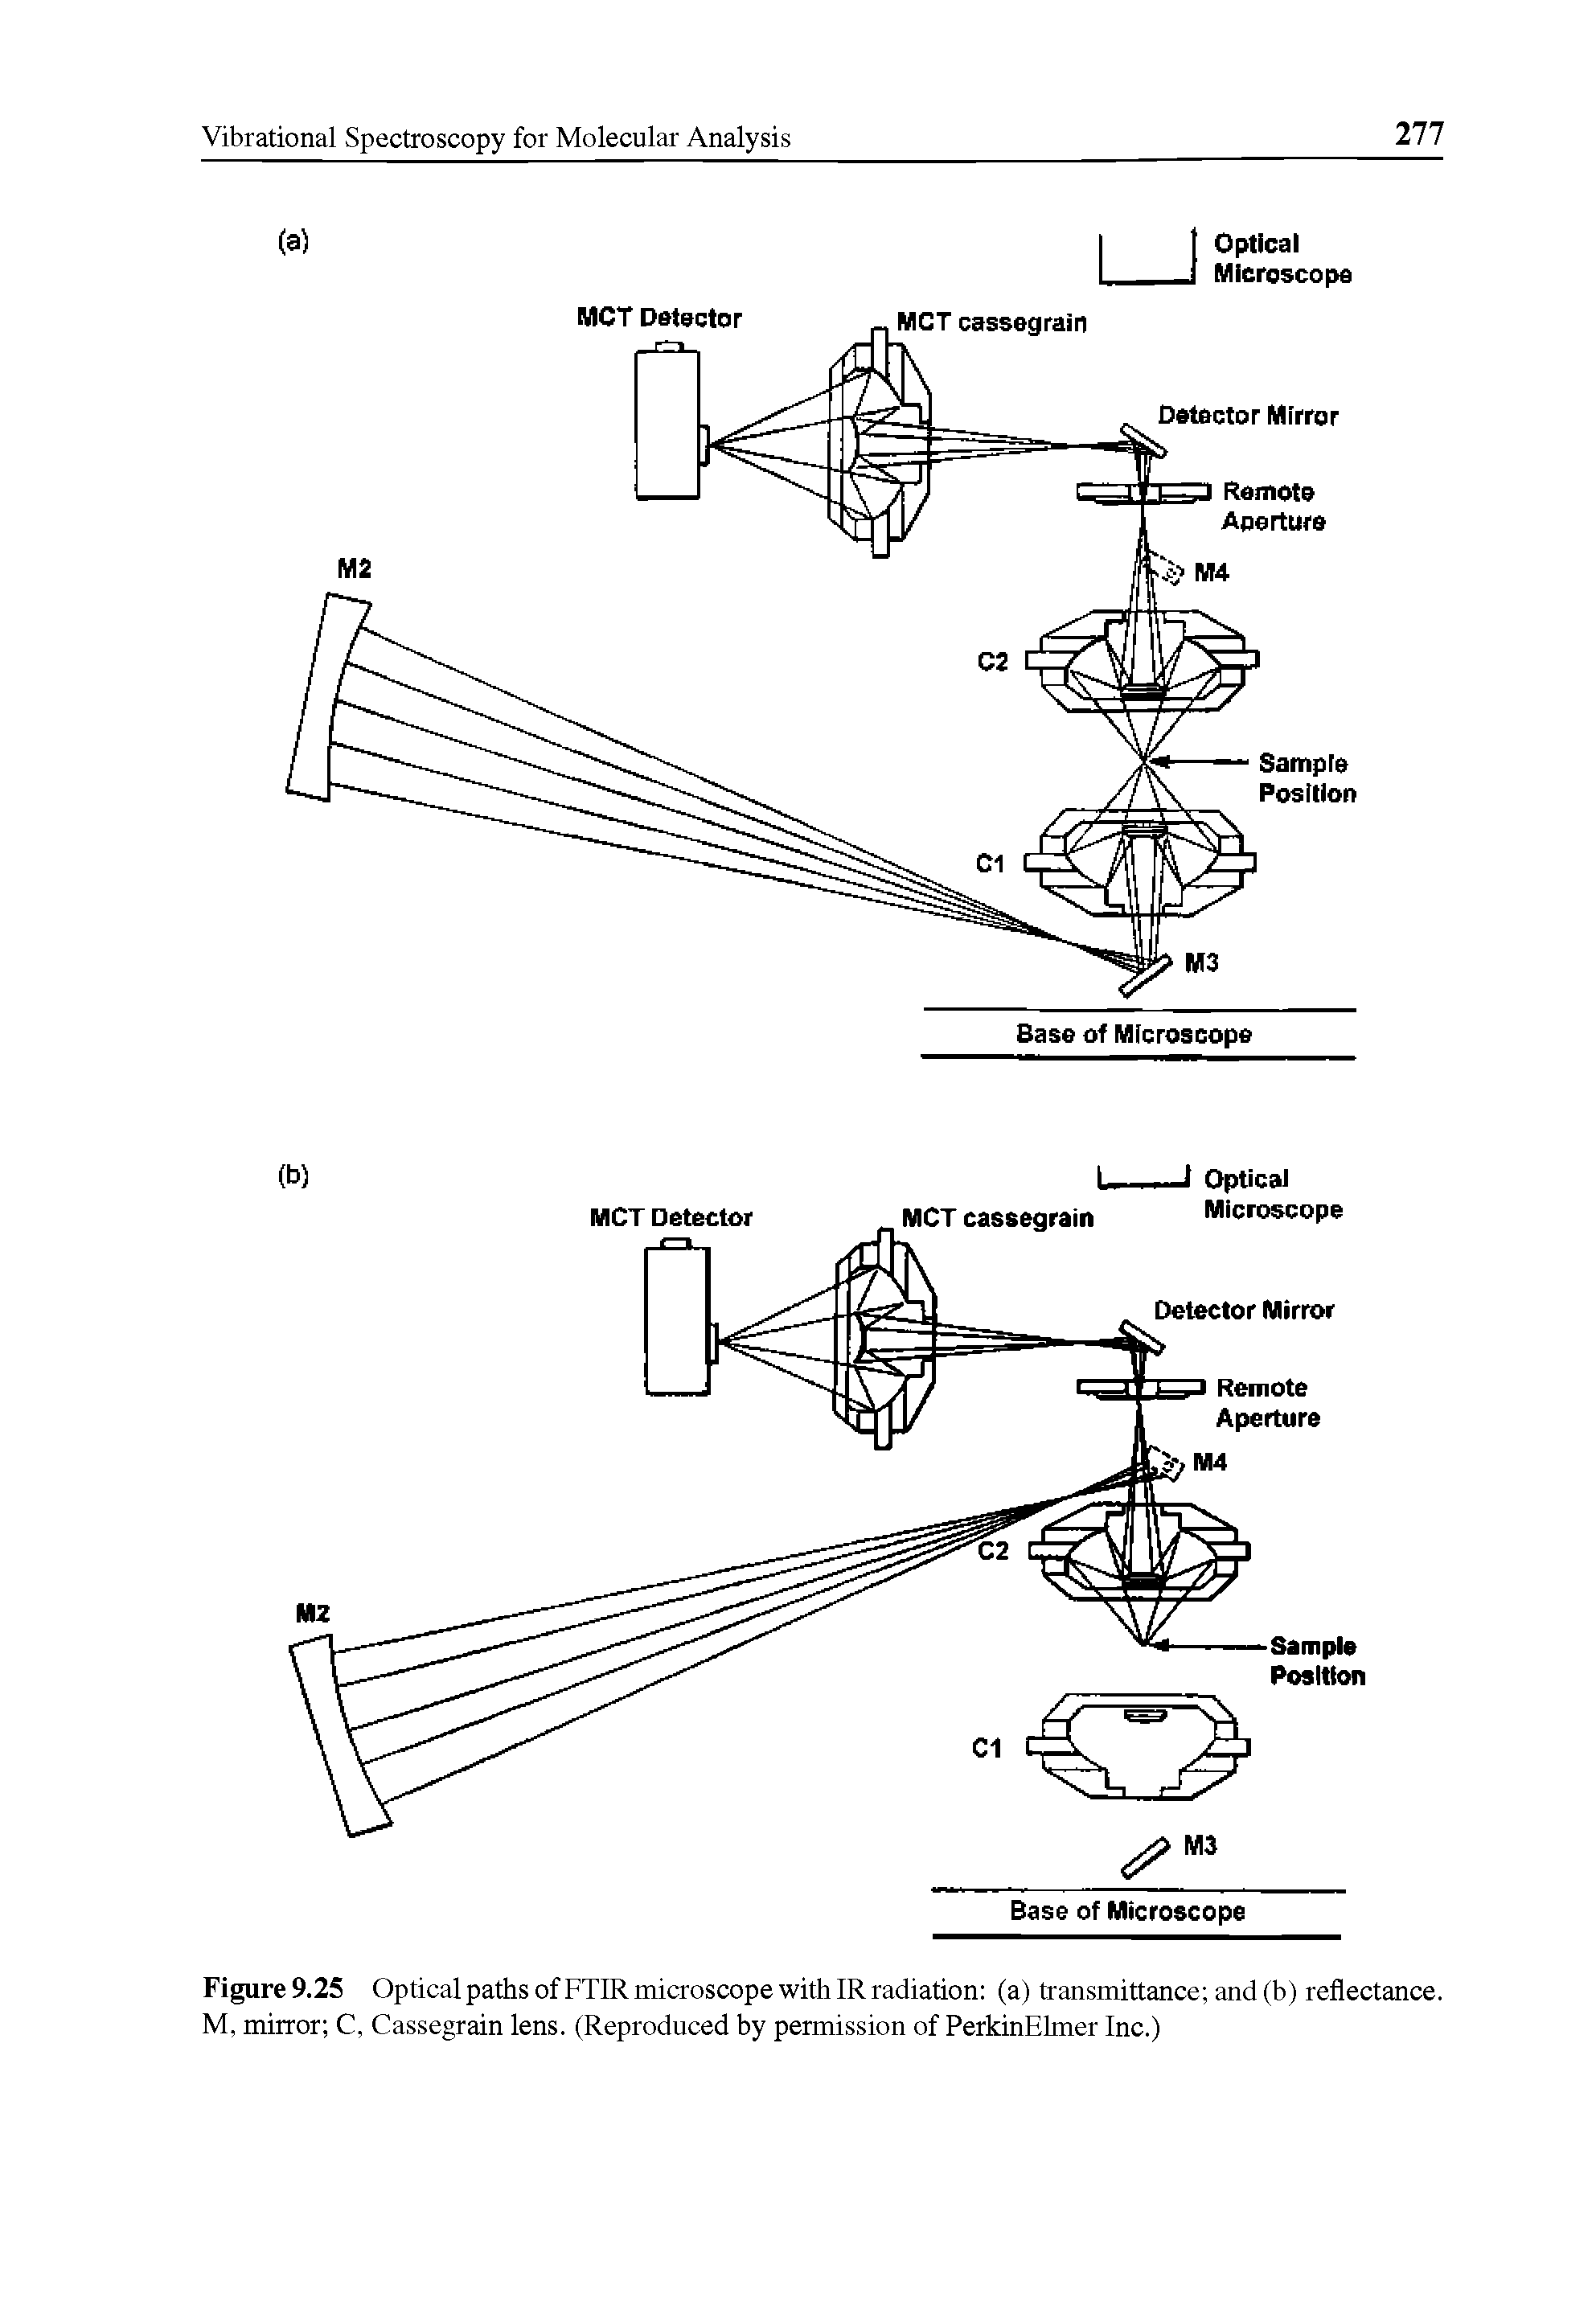 Figure 9.25 Optical paths of FTIR microscope with IR radiation (a) transmittance and (b) reflectance. M, mirror C, Cassegrain lens. (Reproduced by permission of PerkinElmer Inc.)...